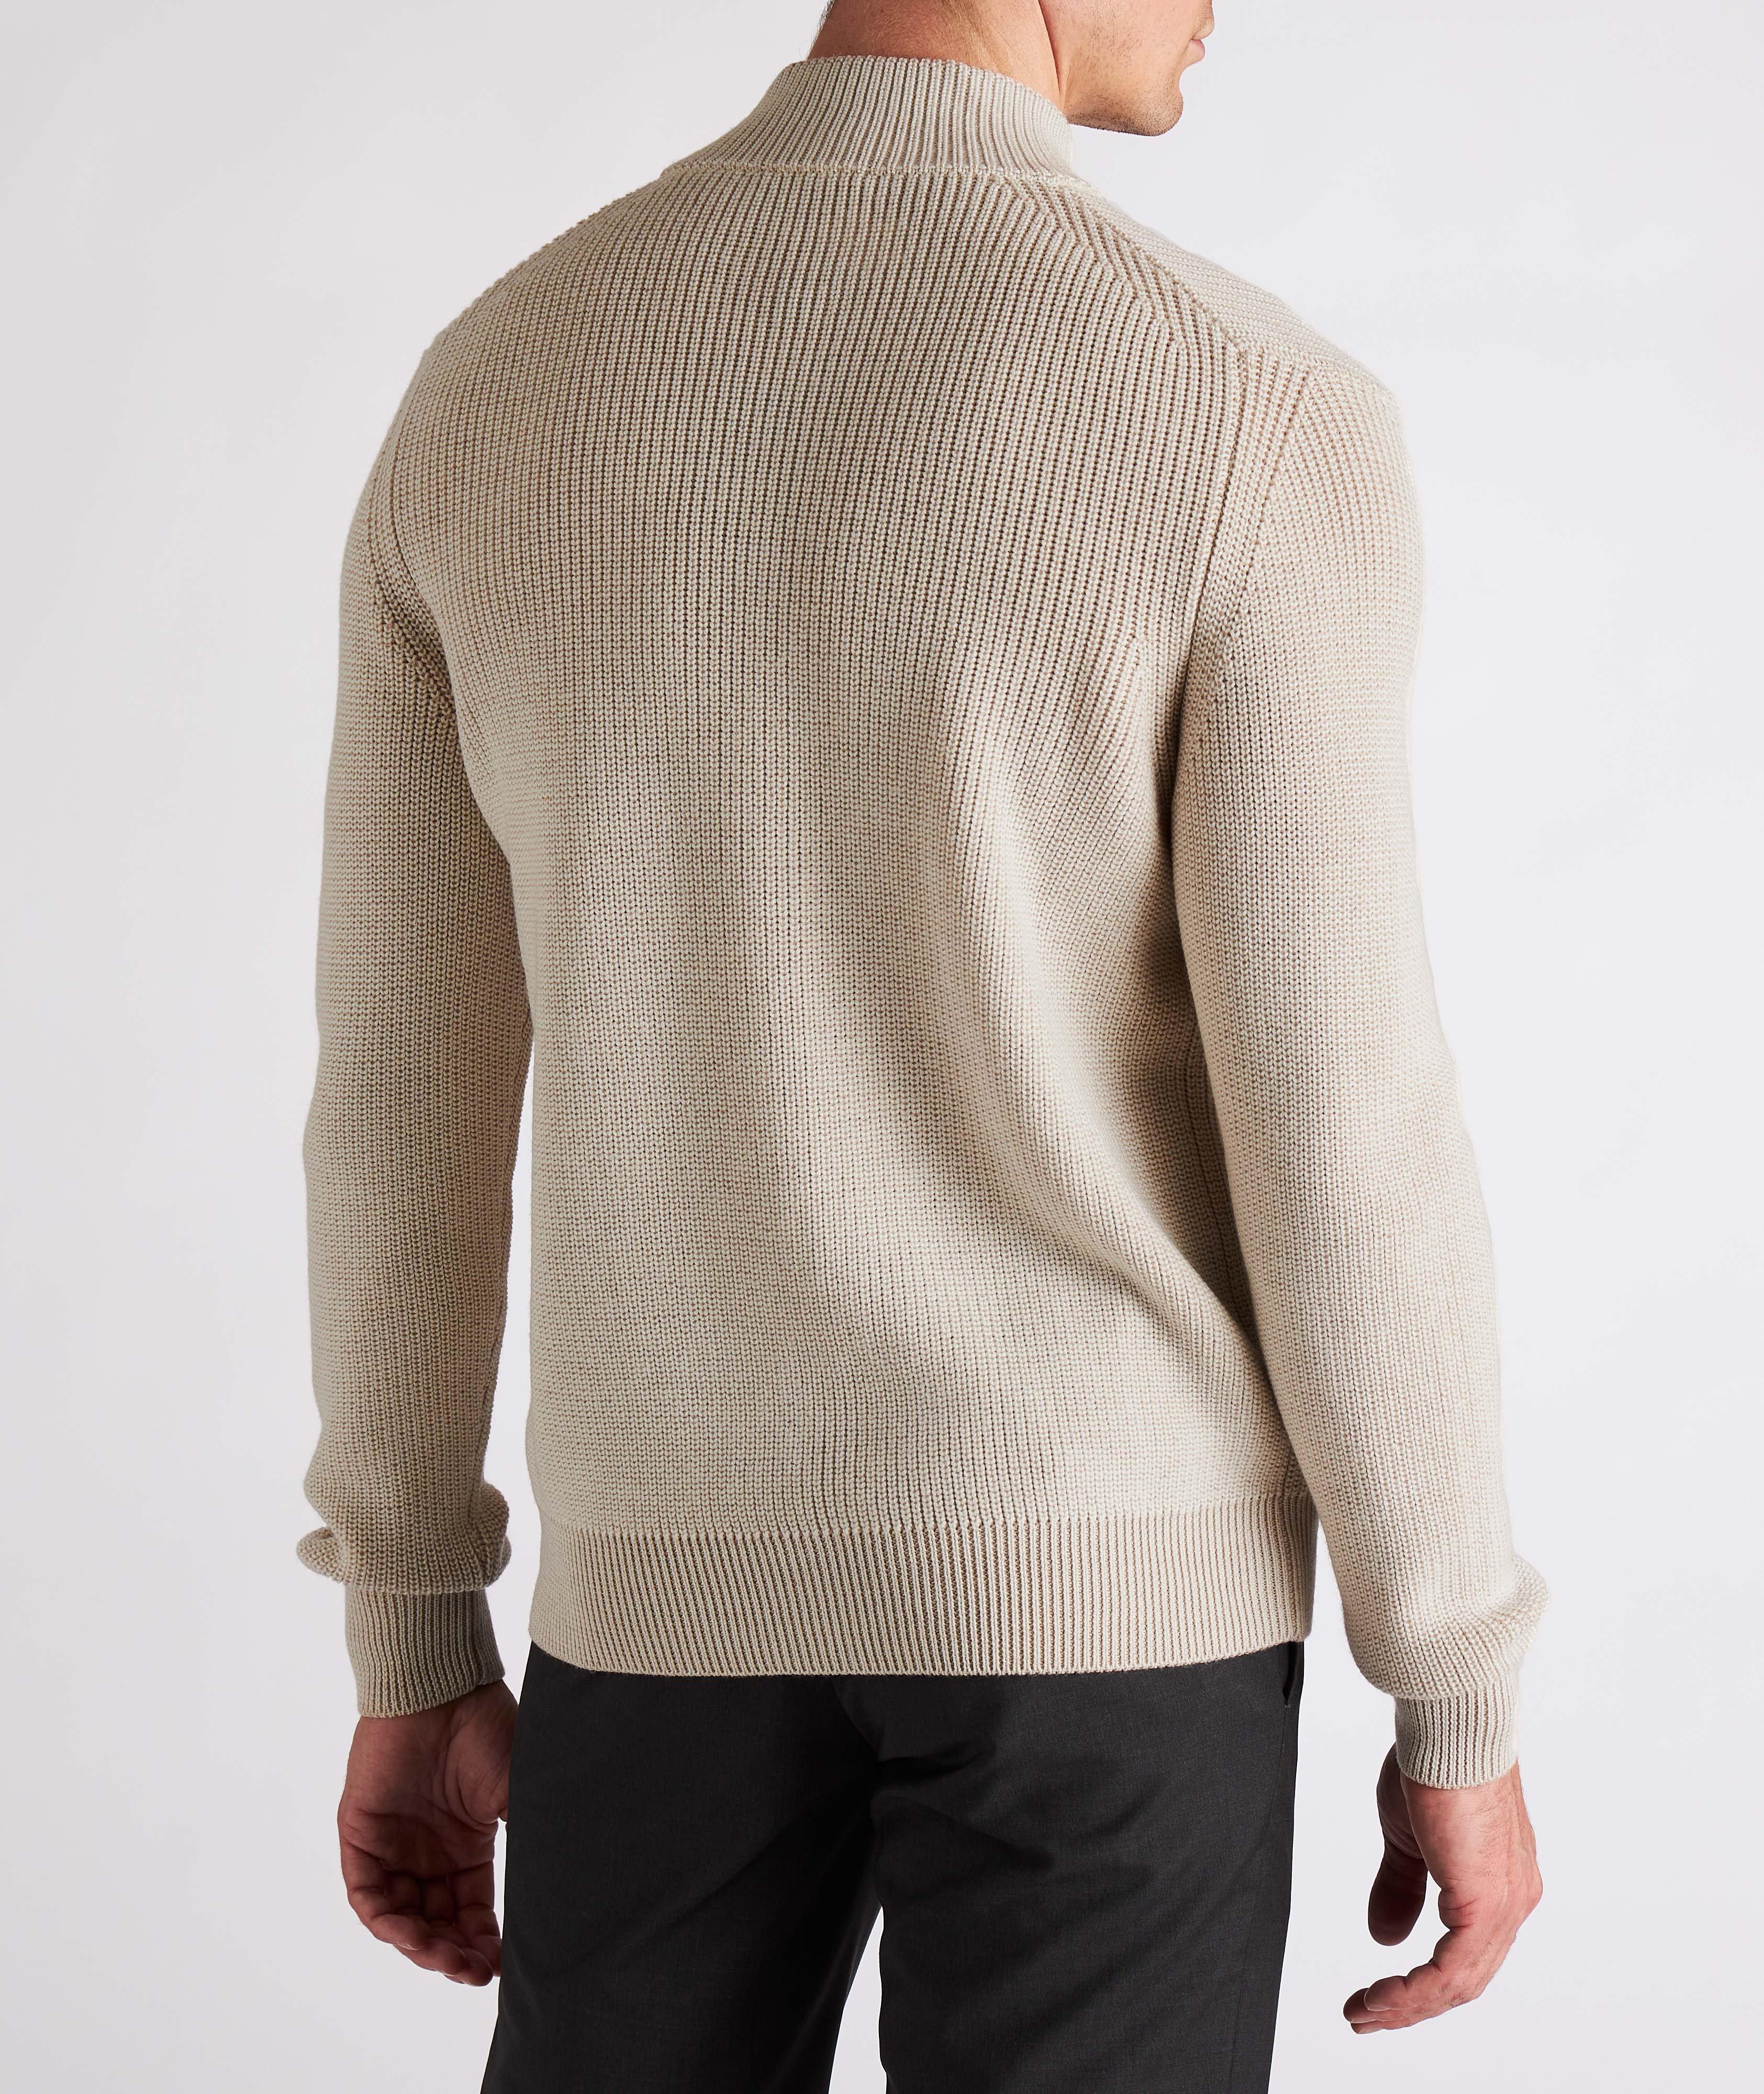 Zip-Up Cable Knit Wool Sweater image 2